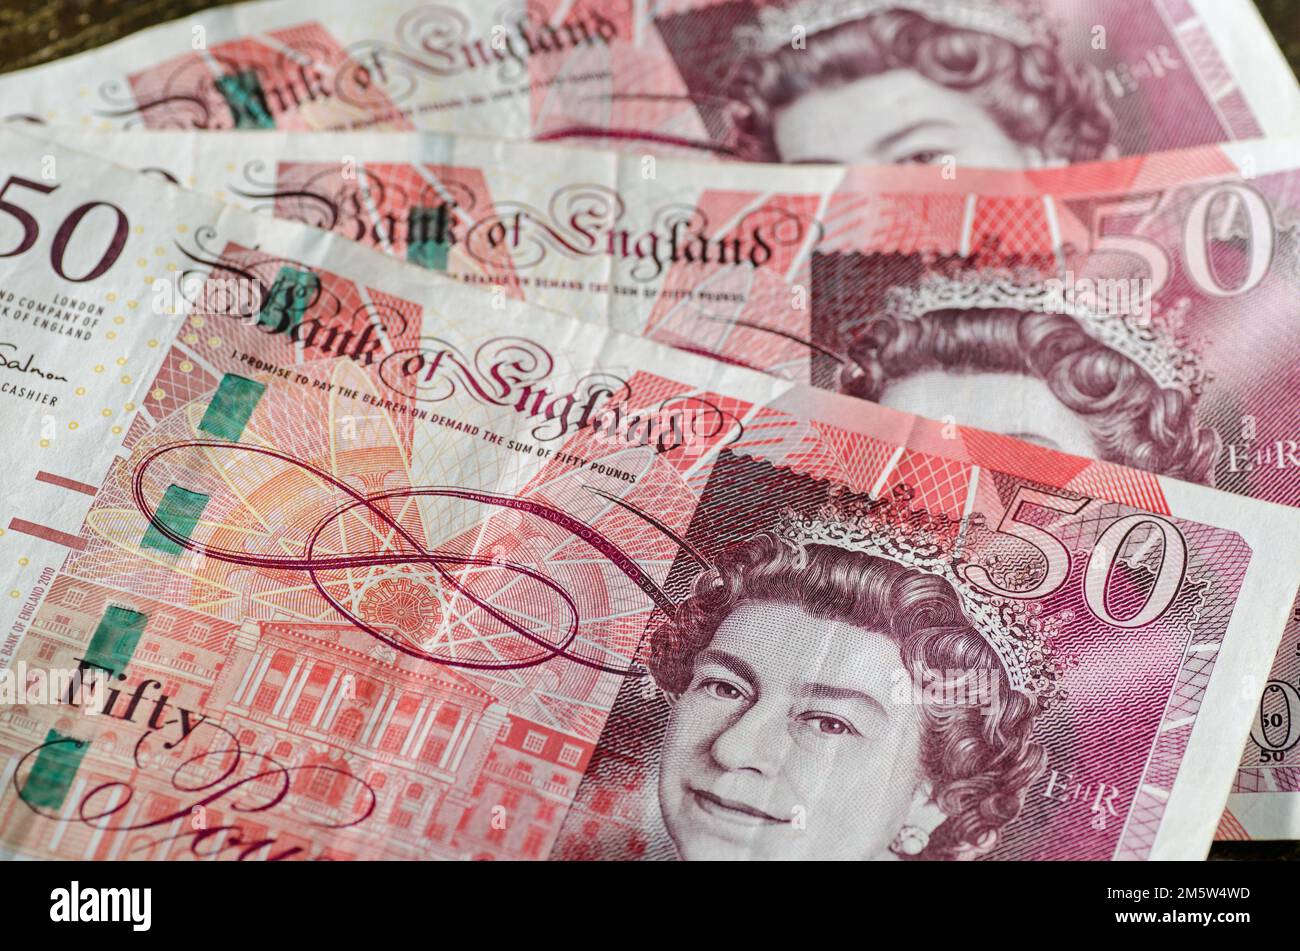 Close up of a fan of three £50 Bank of England banknotes showing Queen Elizabeth II with a pink and orange background.  Used banknotes, photographed a Stock Photo